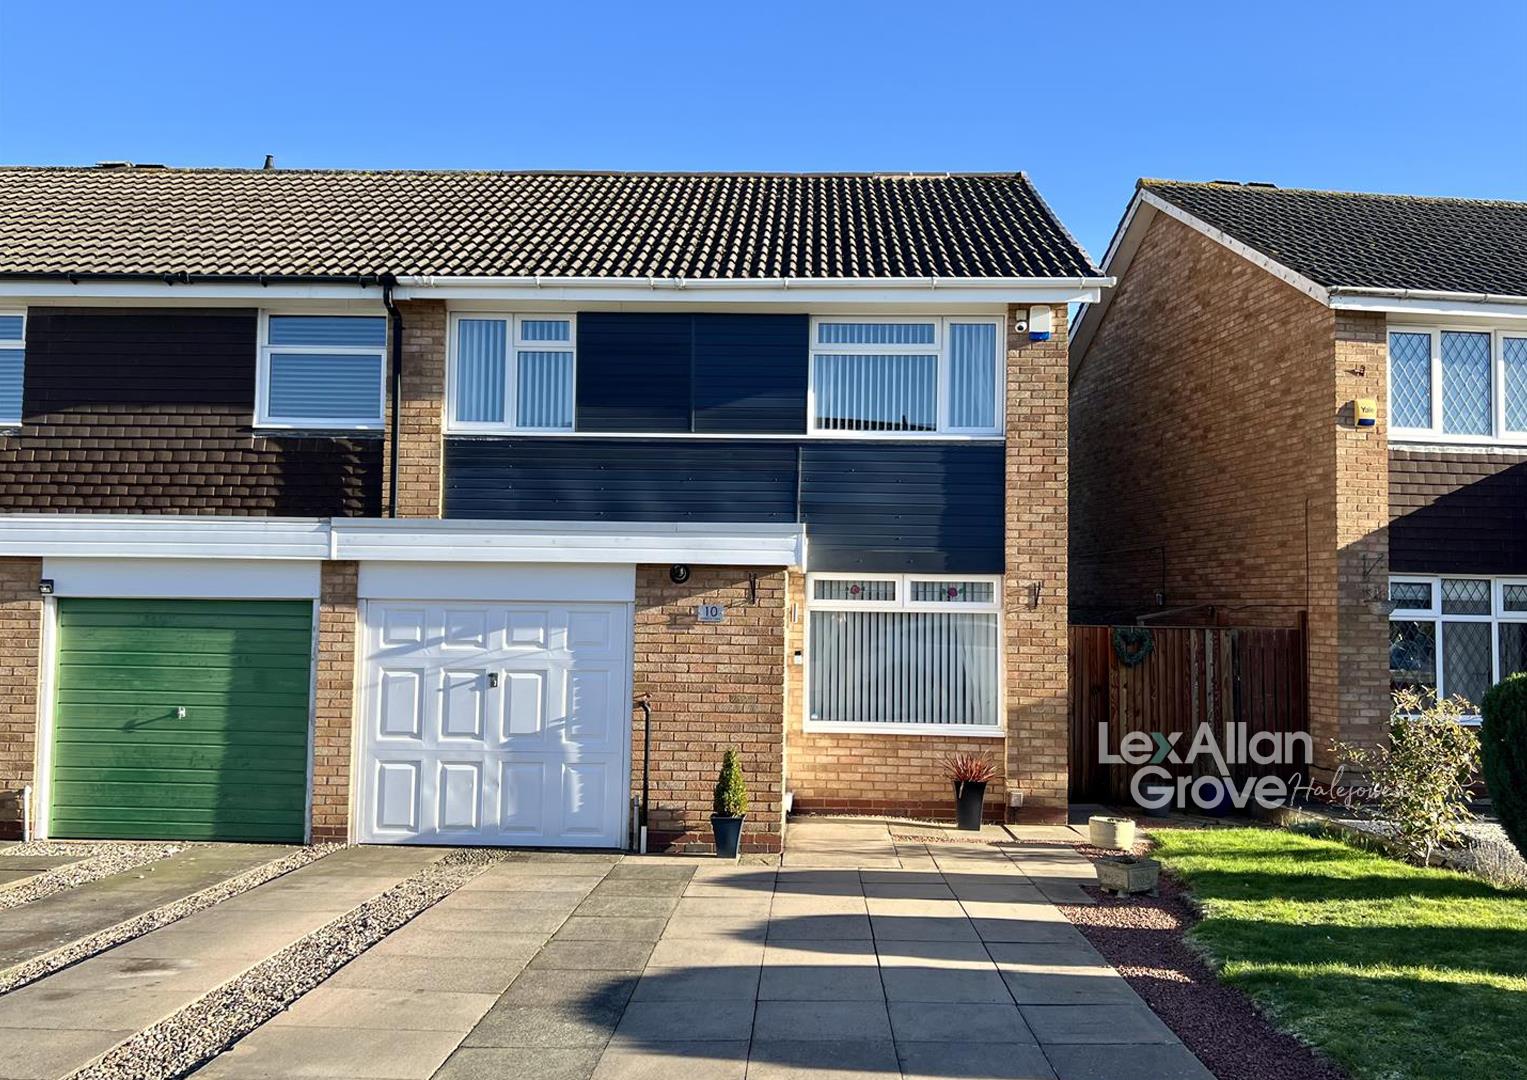 3 bed end of terrace house for sale in Purbeck Close, Halesowen - Property Image 1